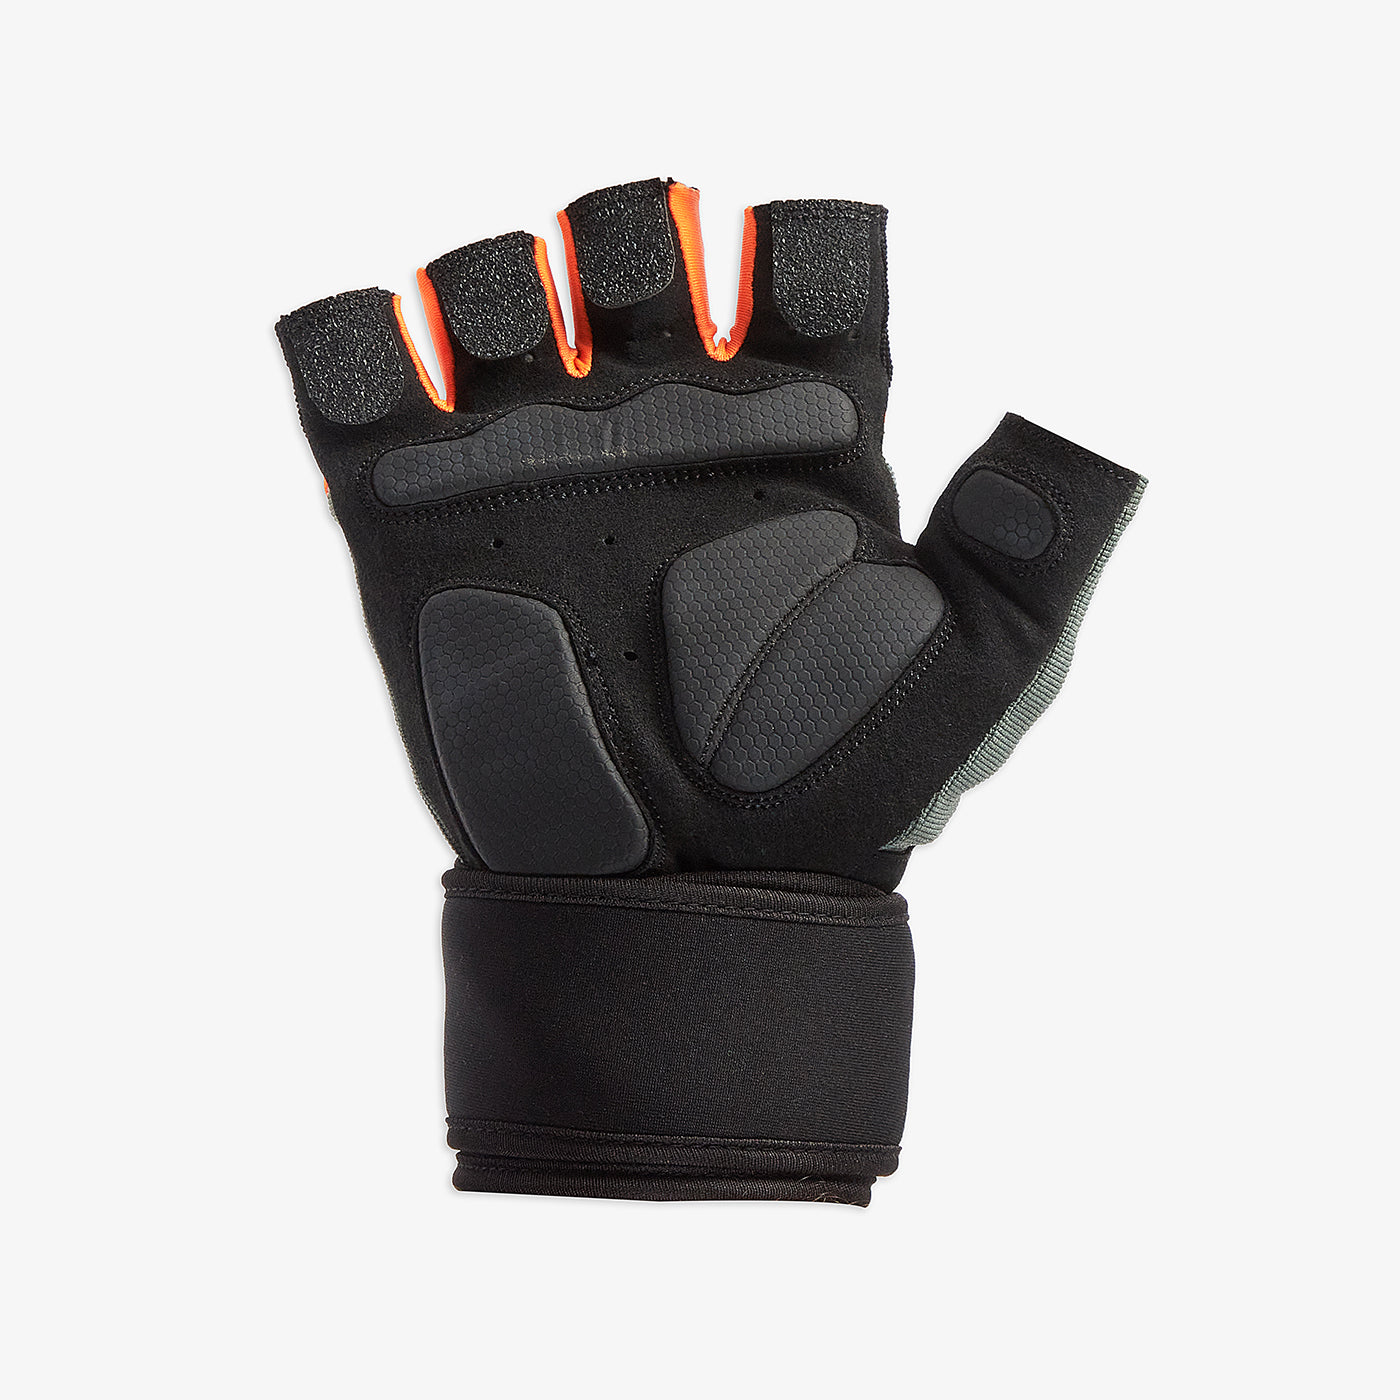 Weight lifting Gloves with palm support